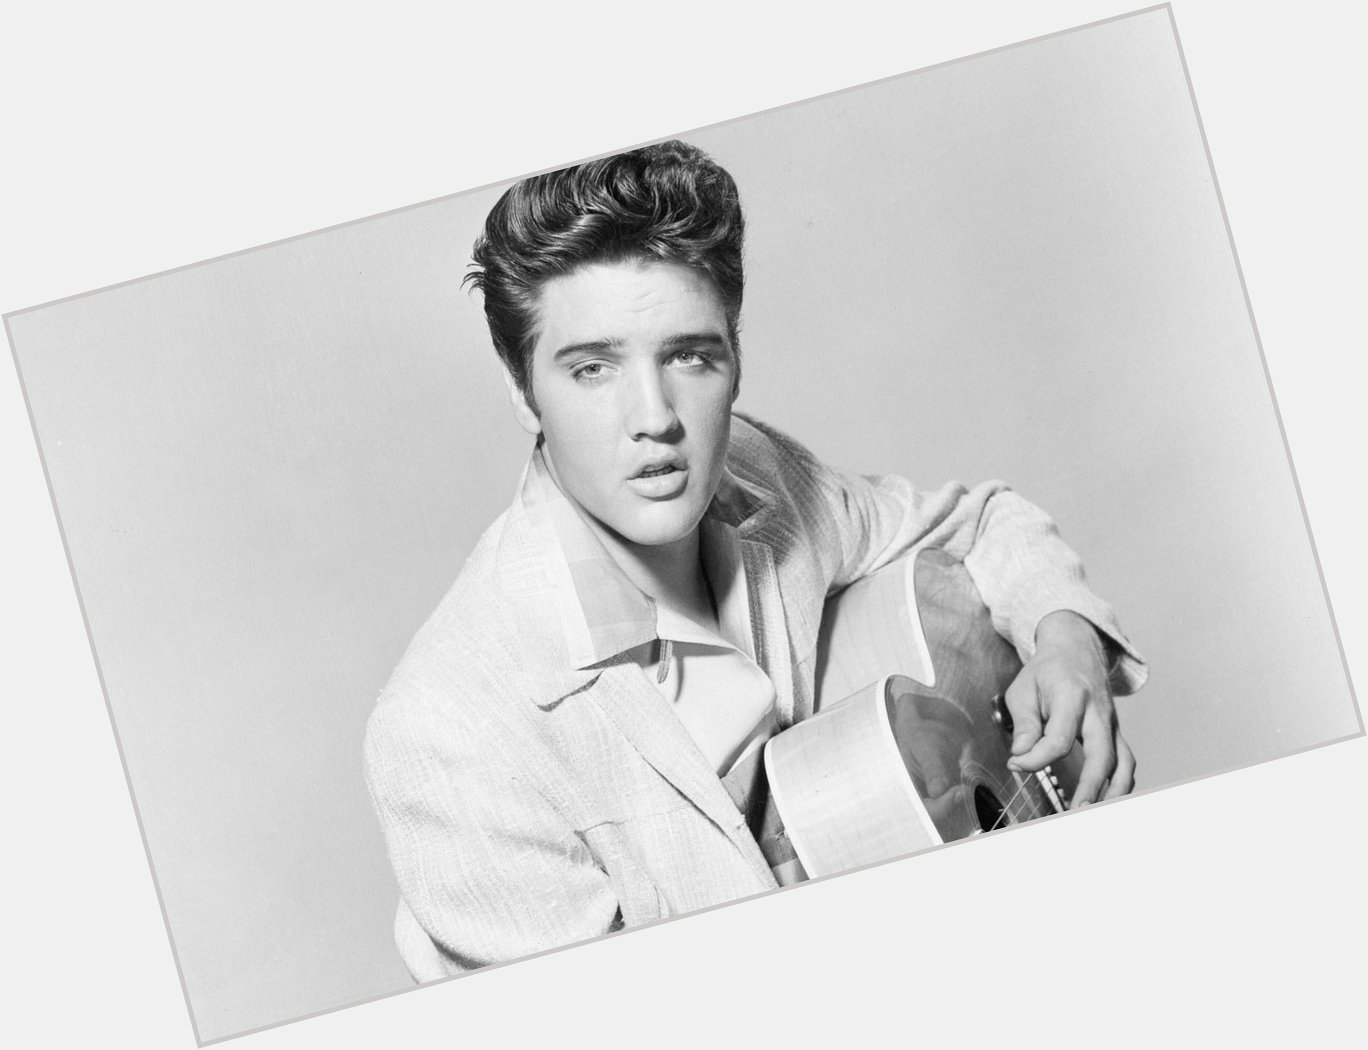 Happy birthday to the King! Elvis Presley was born on this day in 1935. 